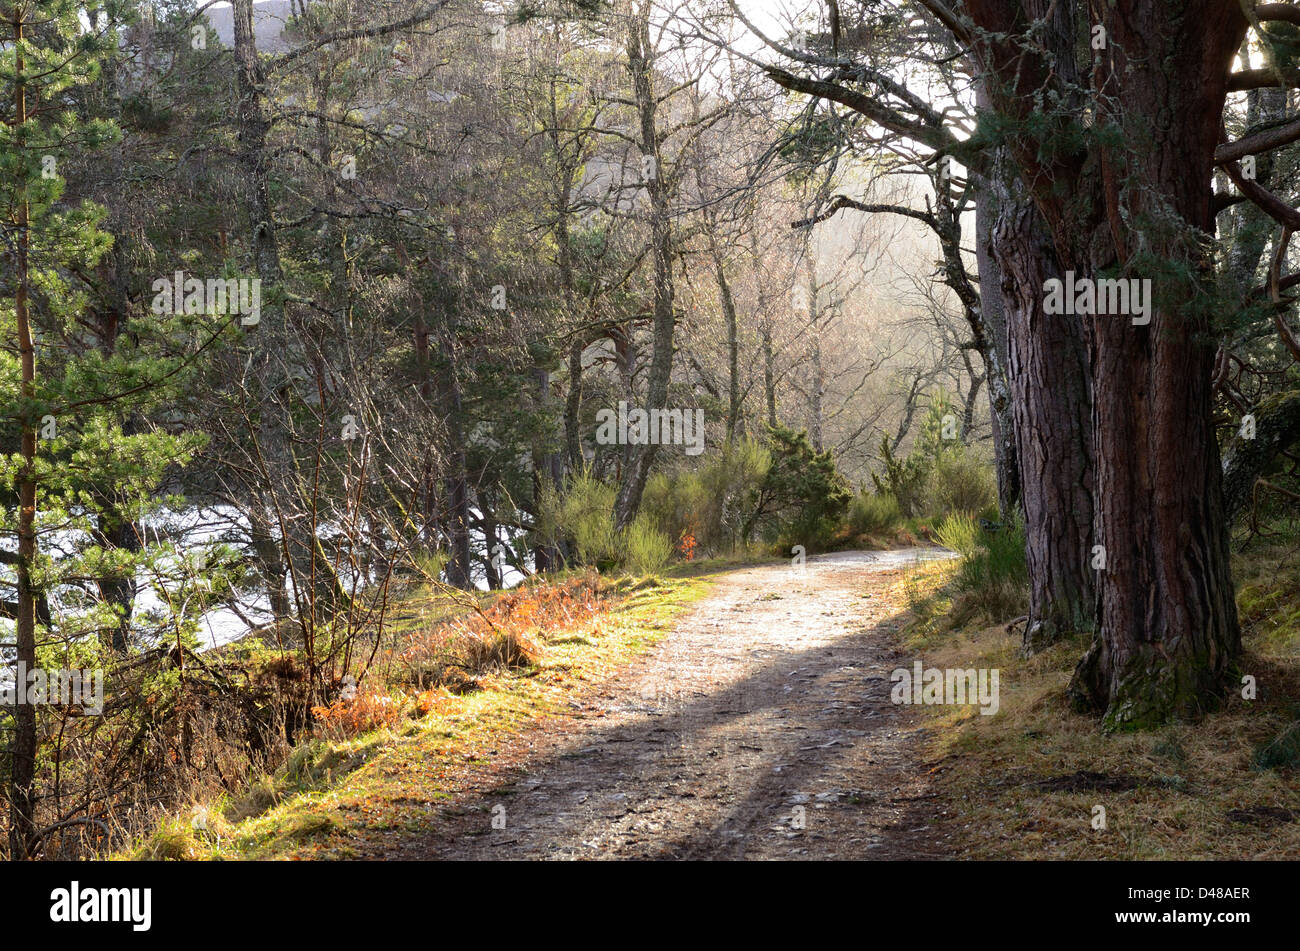 Ancient Pine forests at Loch an Eilean, Cairngorms National Park, Scotland, UK Stock Photo